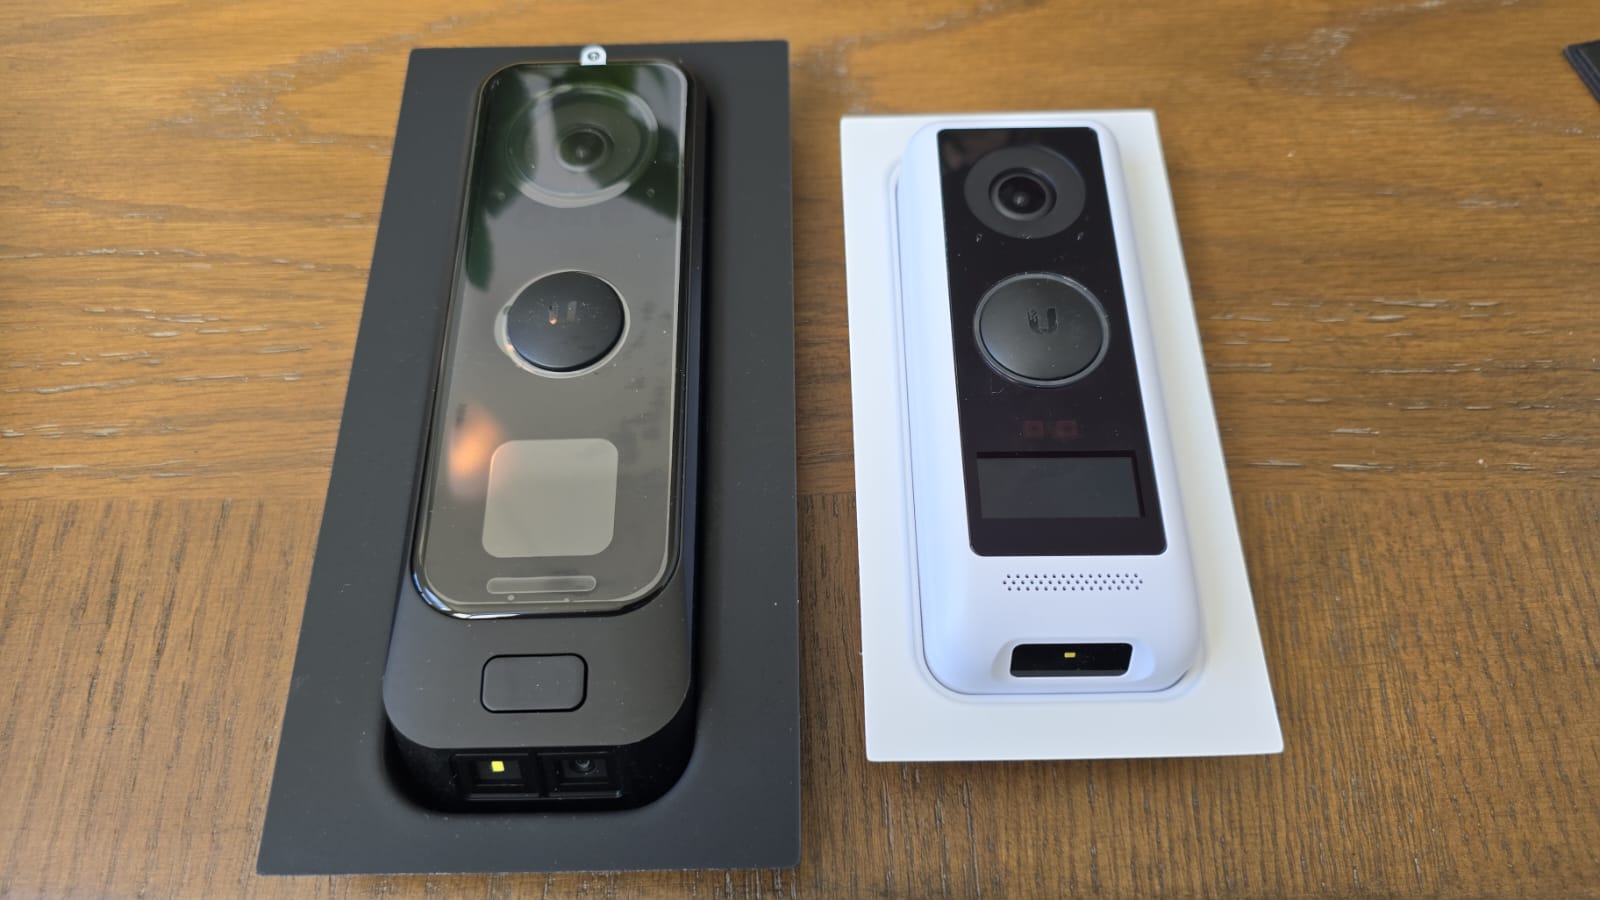 G4 Doorbell Pro: The Ultimate Smart Security (Trusted Review)